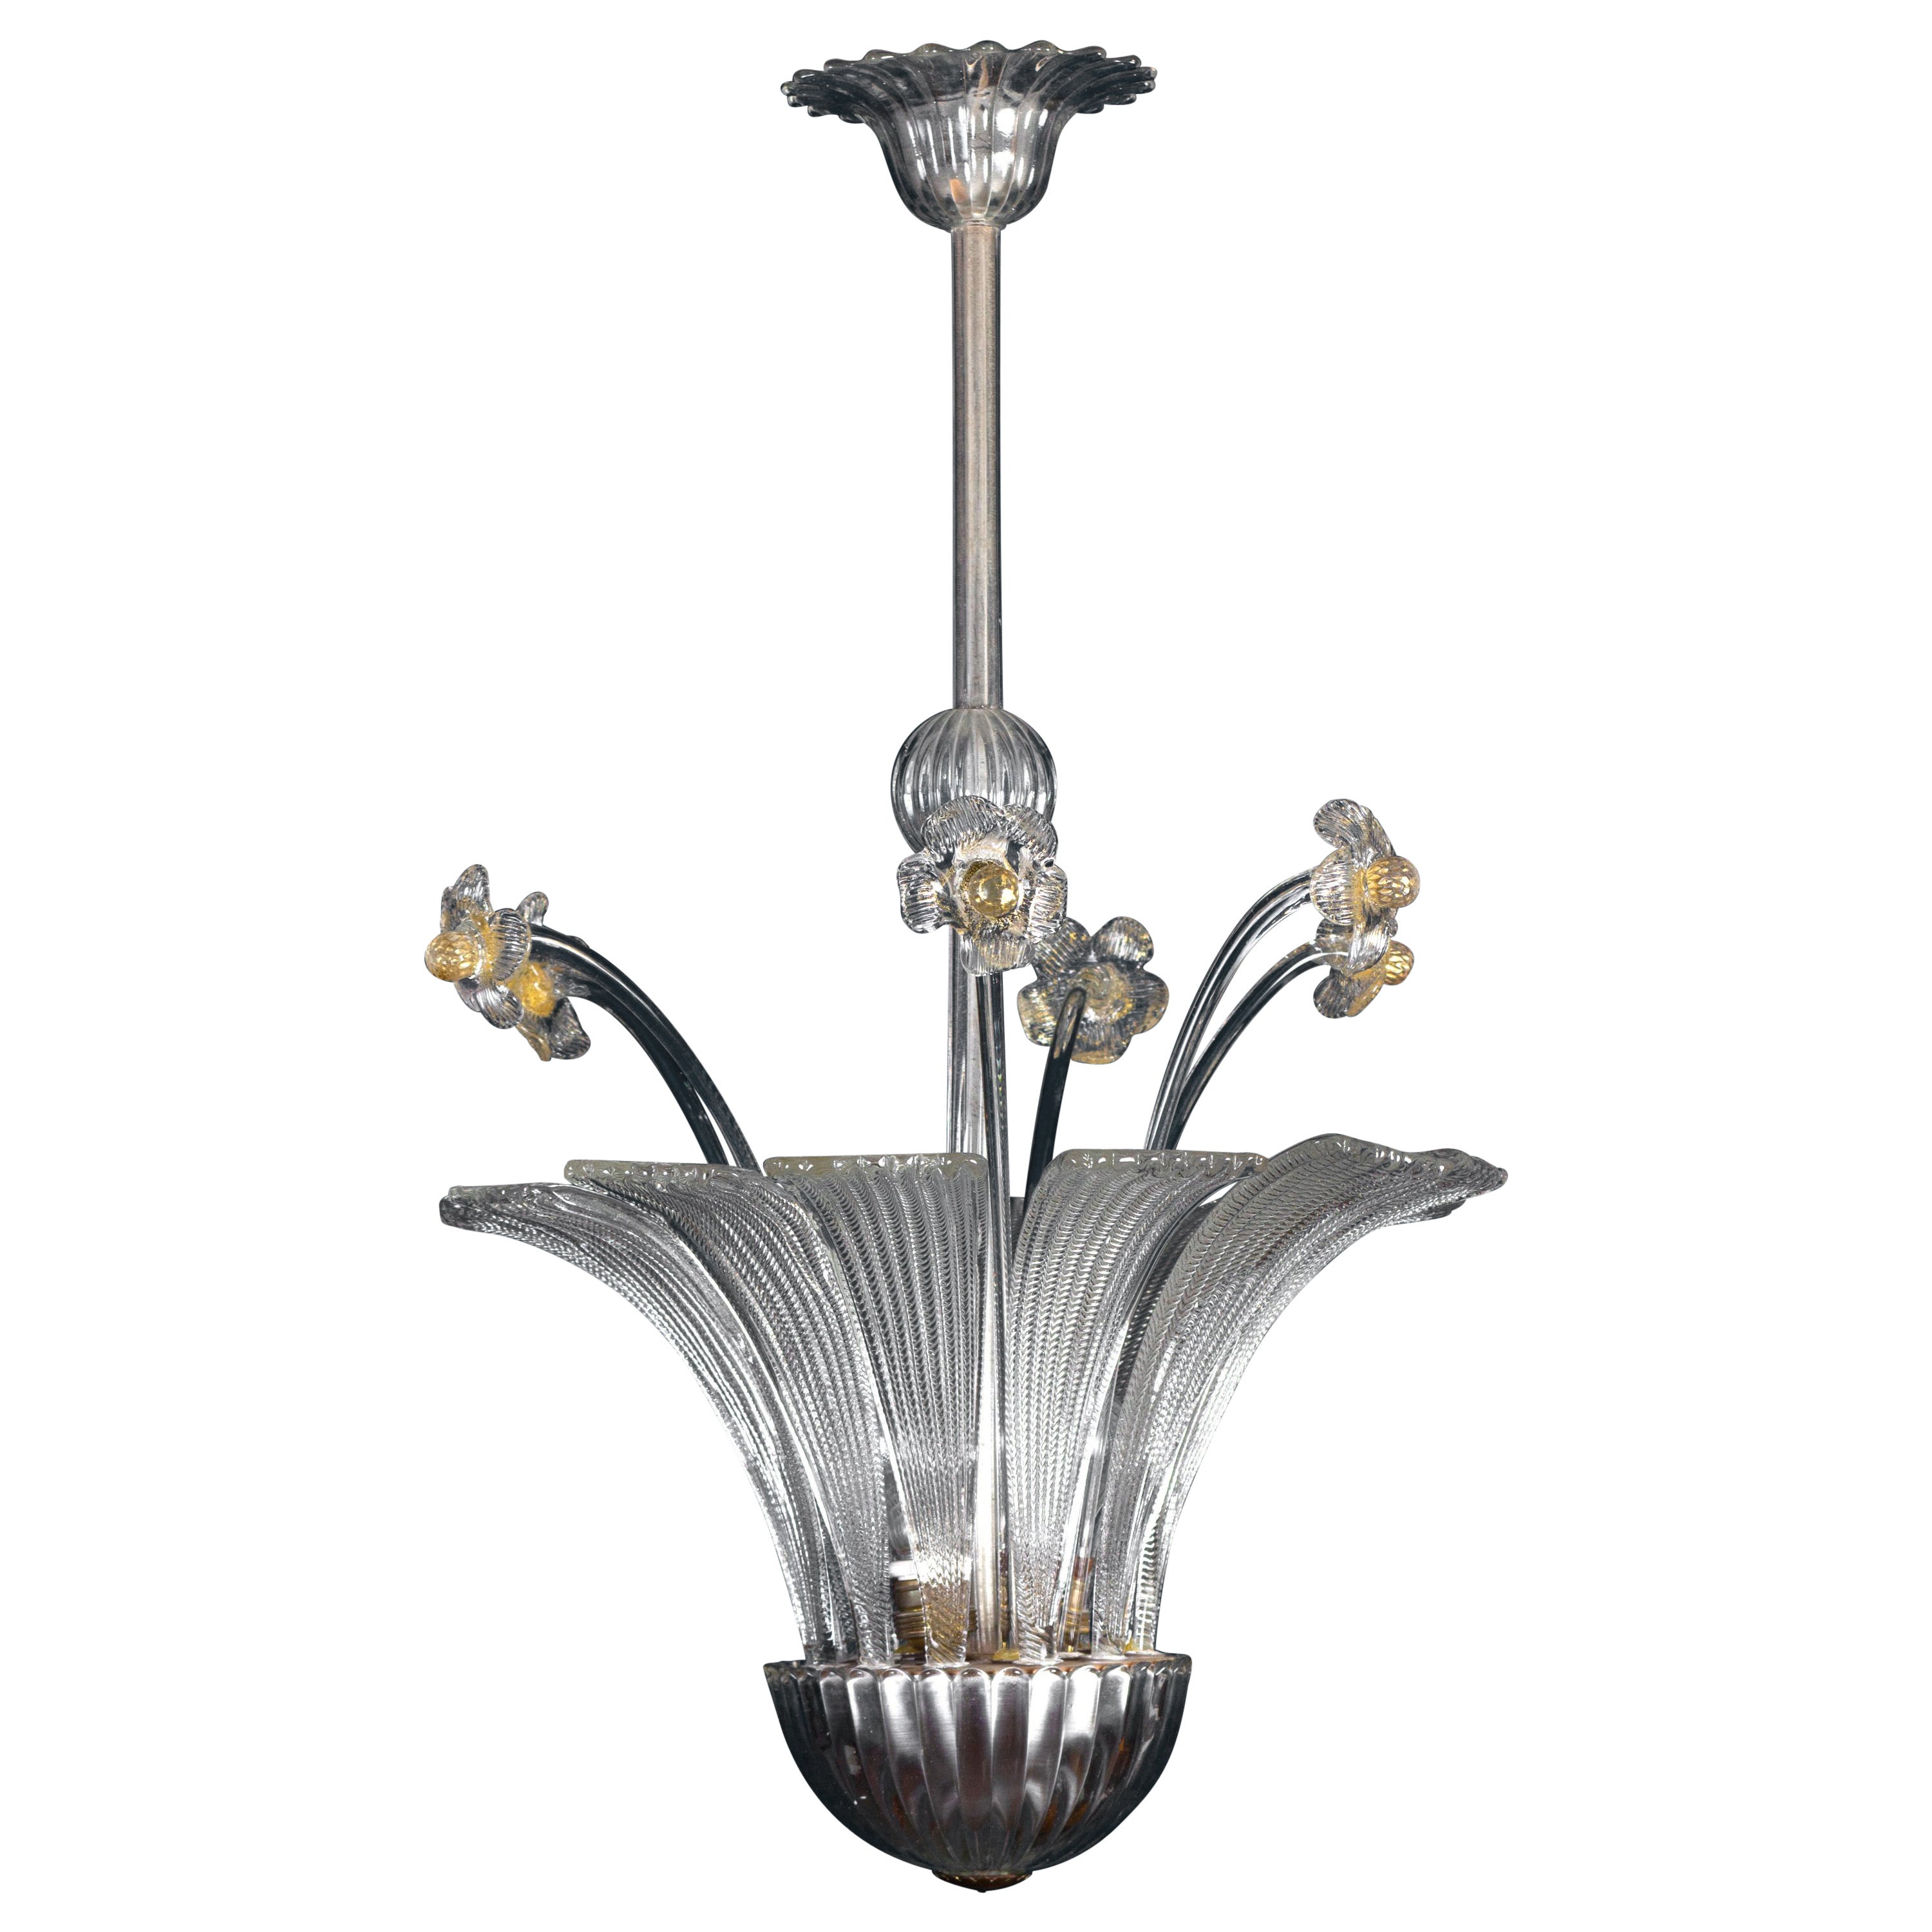 Charming Mid-Century Chandelier or Lantern by Barovier 1950' For Sale